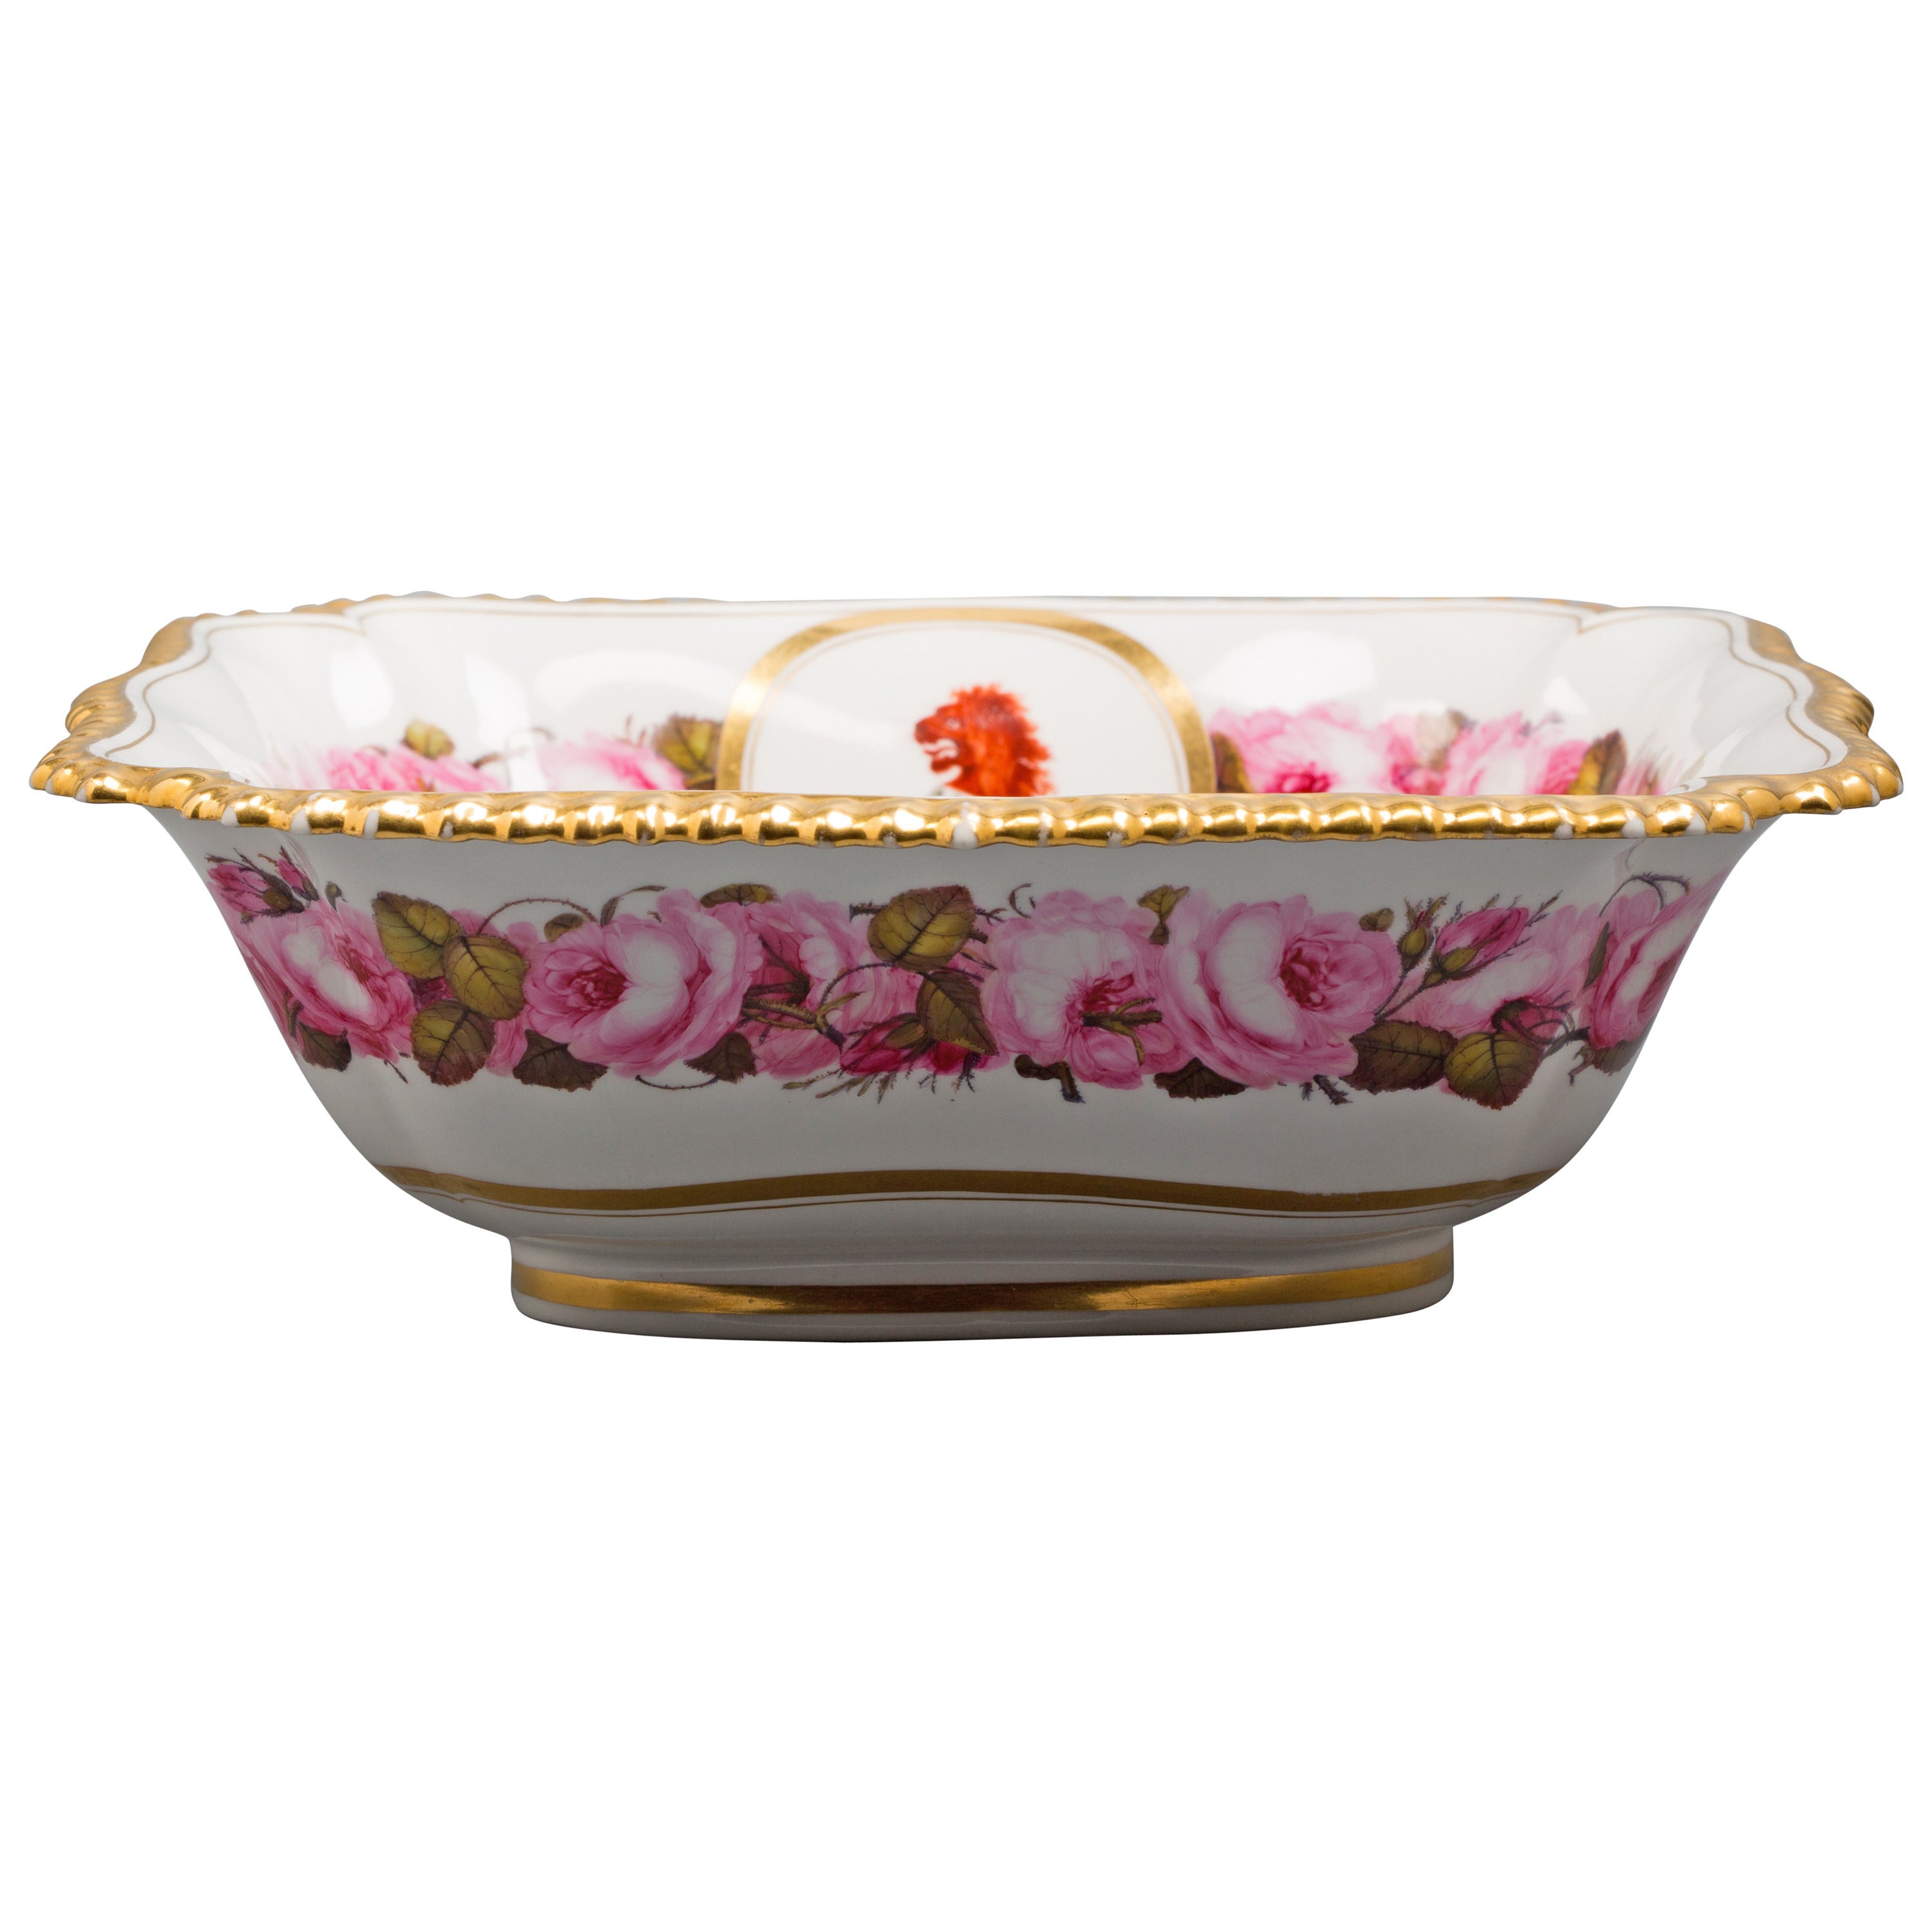 English Porcelain Bowl, Flight Barr and Barr, circa 1820 For Sale